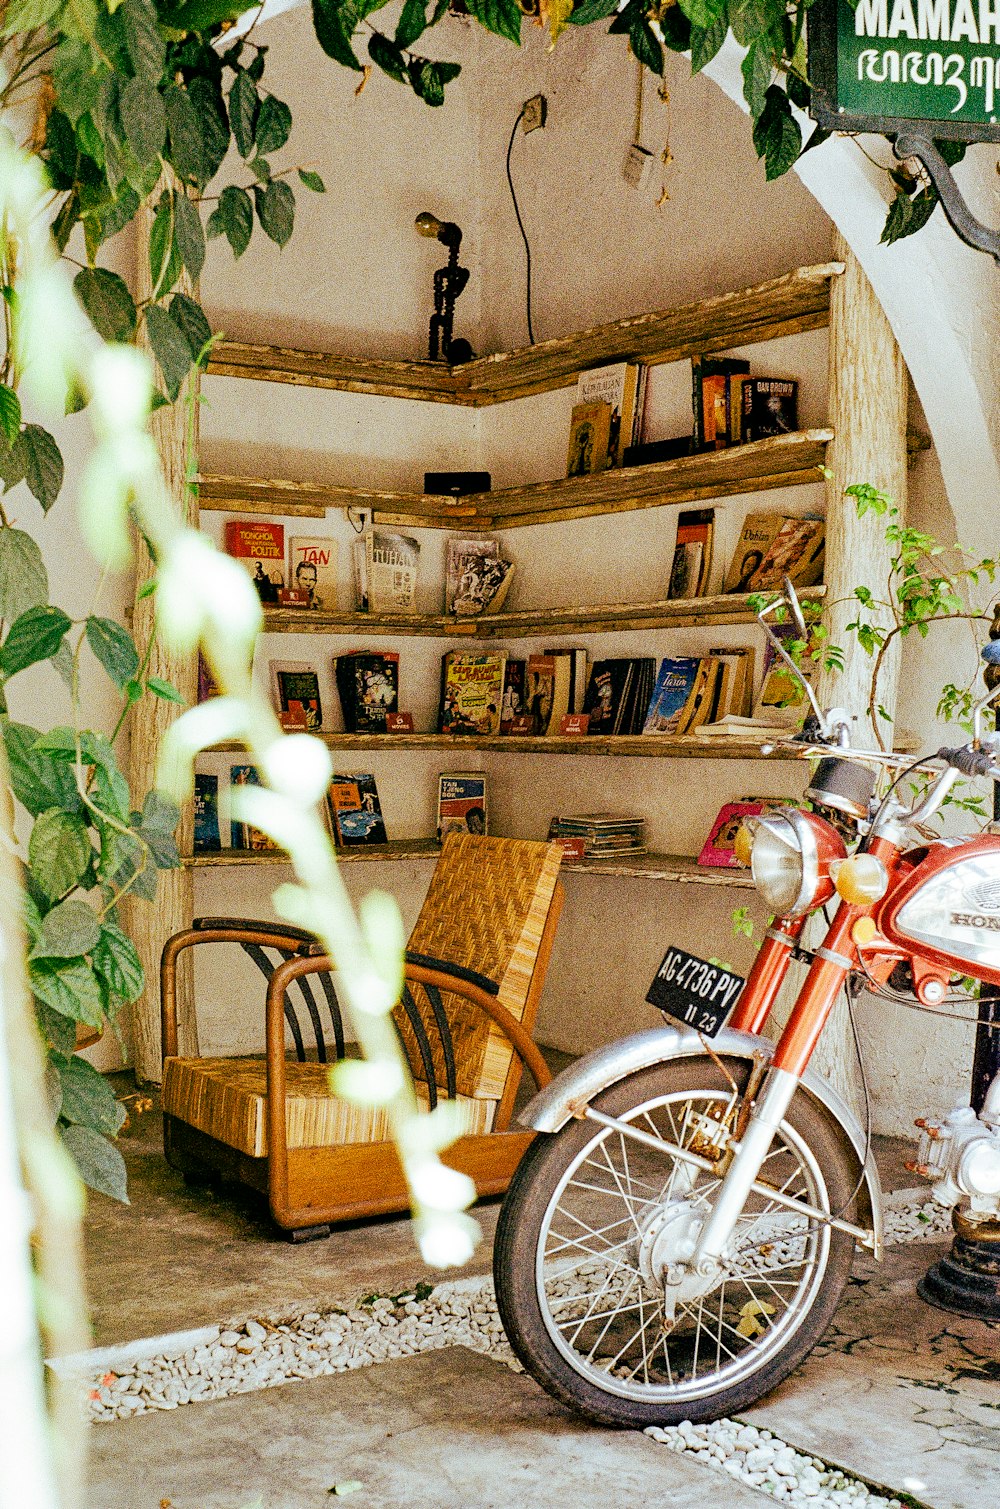 a motorcycle is parked in a room with a book shelf